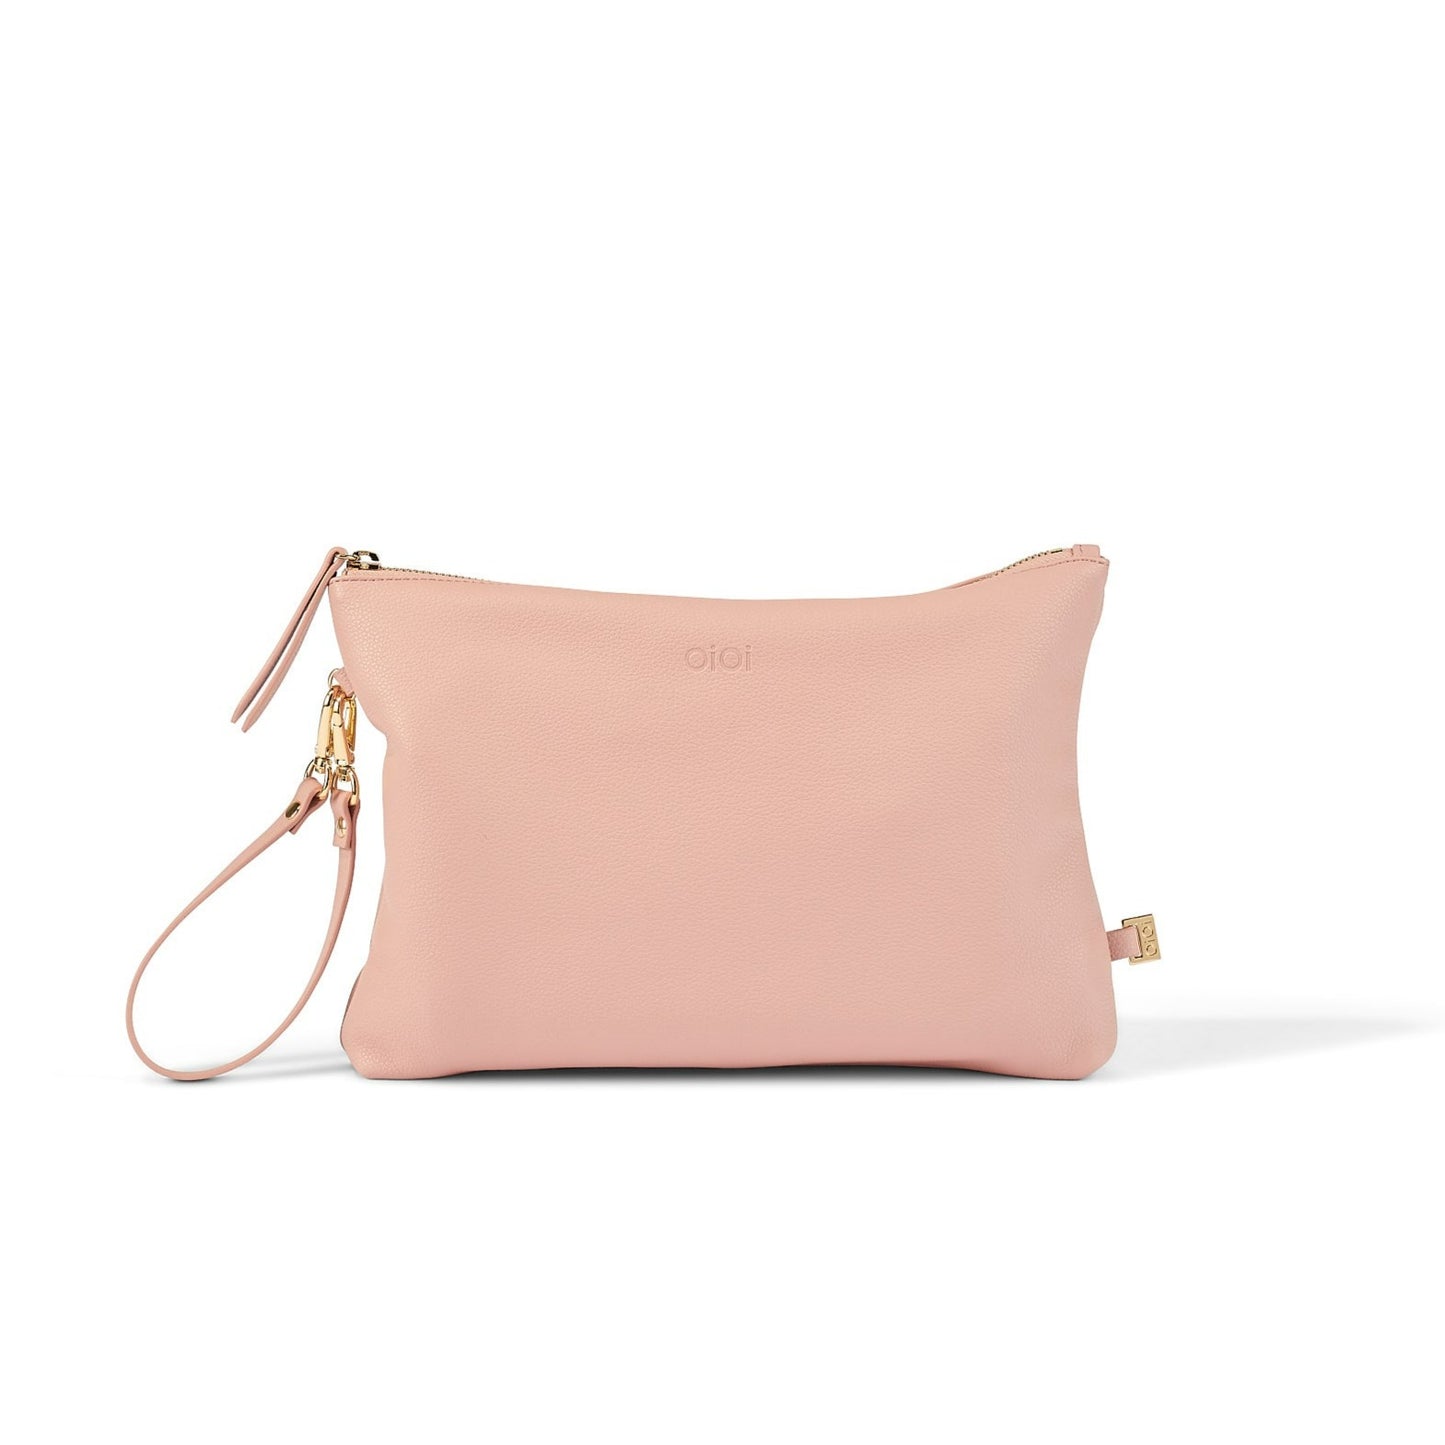 Diaper Changing Pouch - Pink Vegan Leather